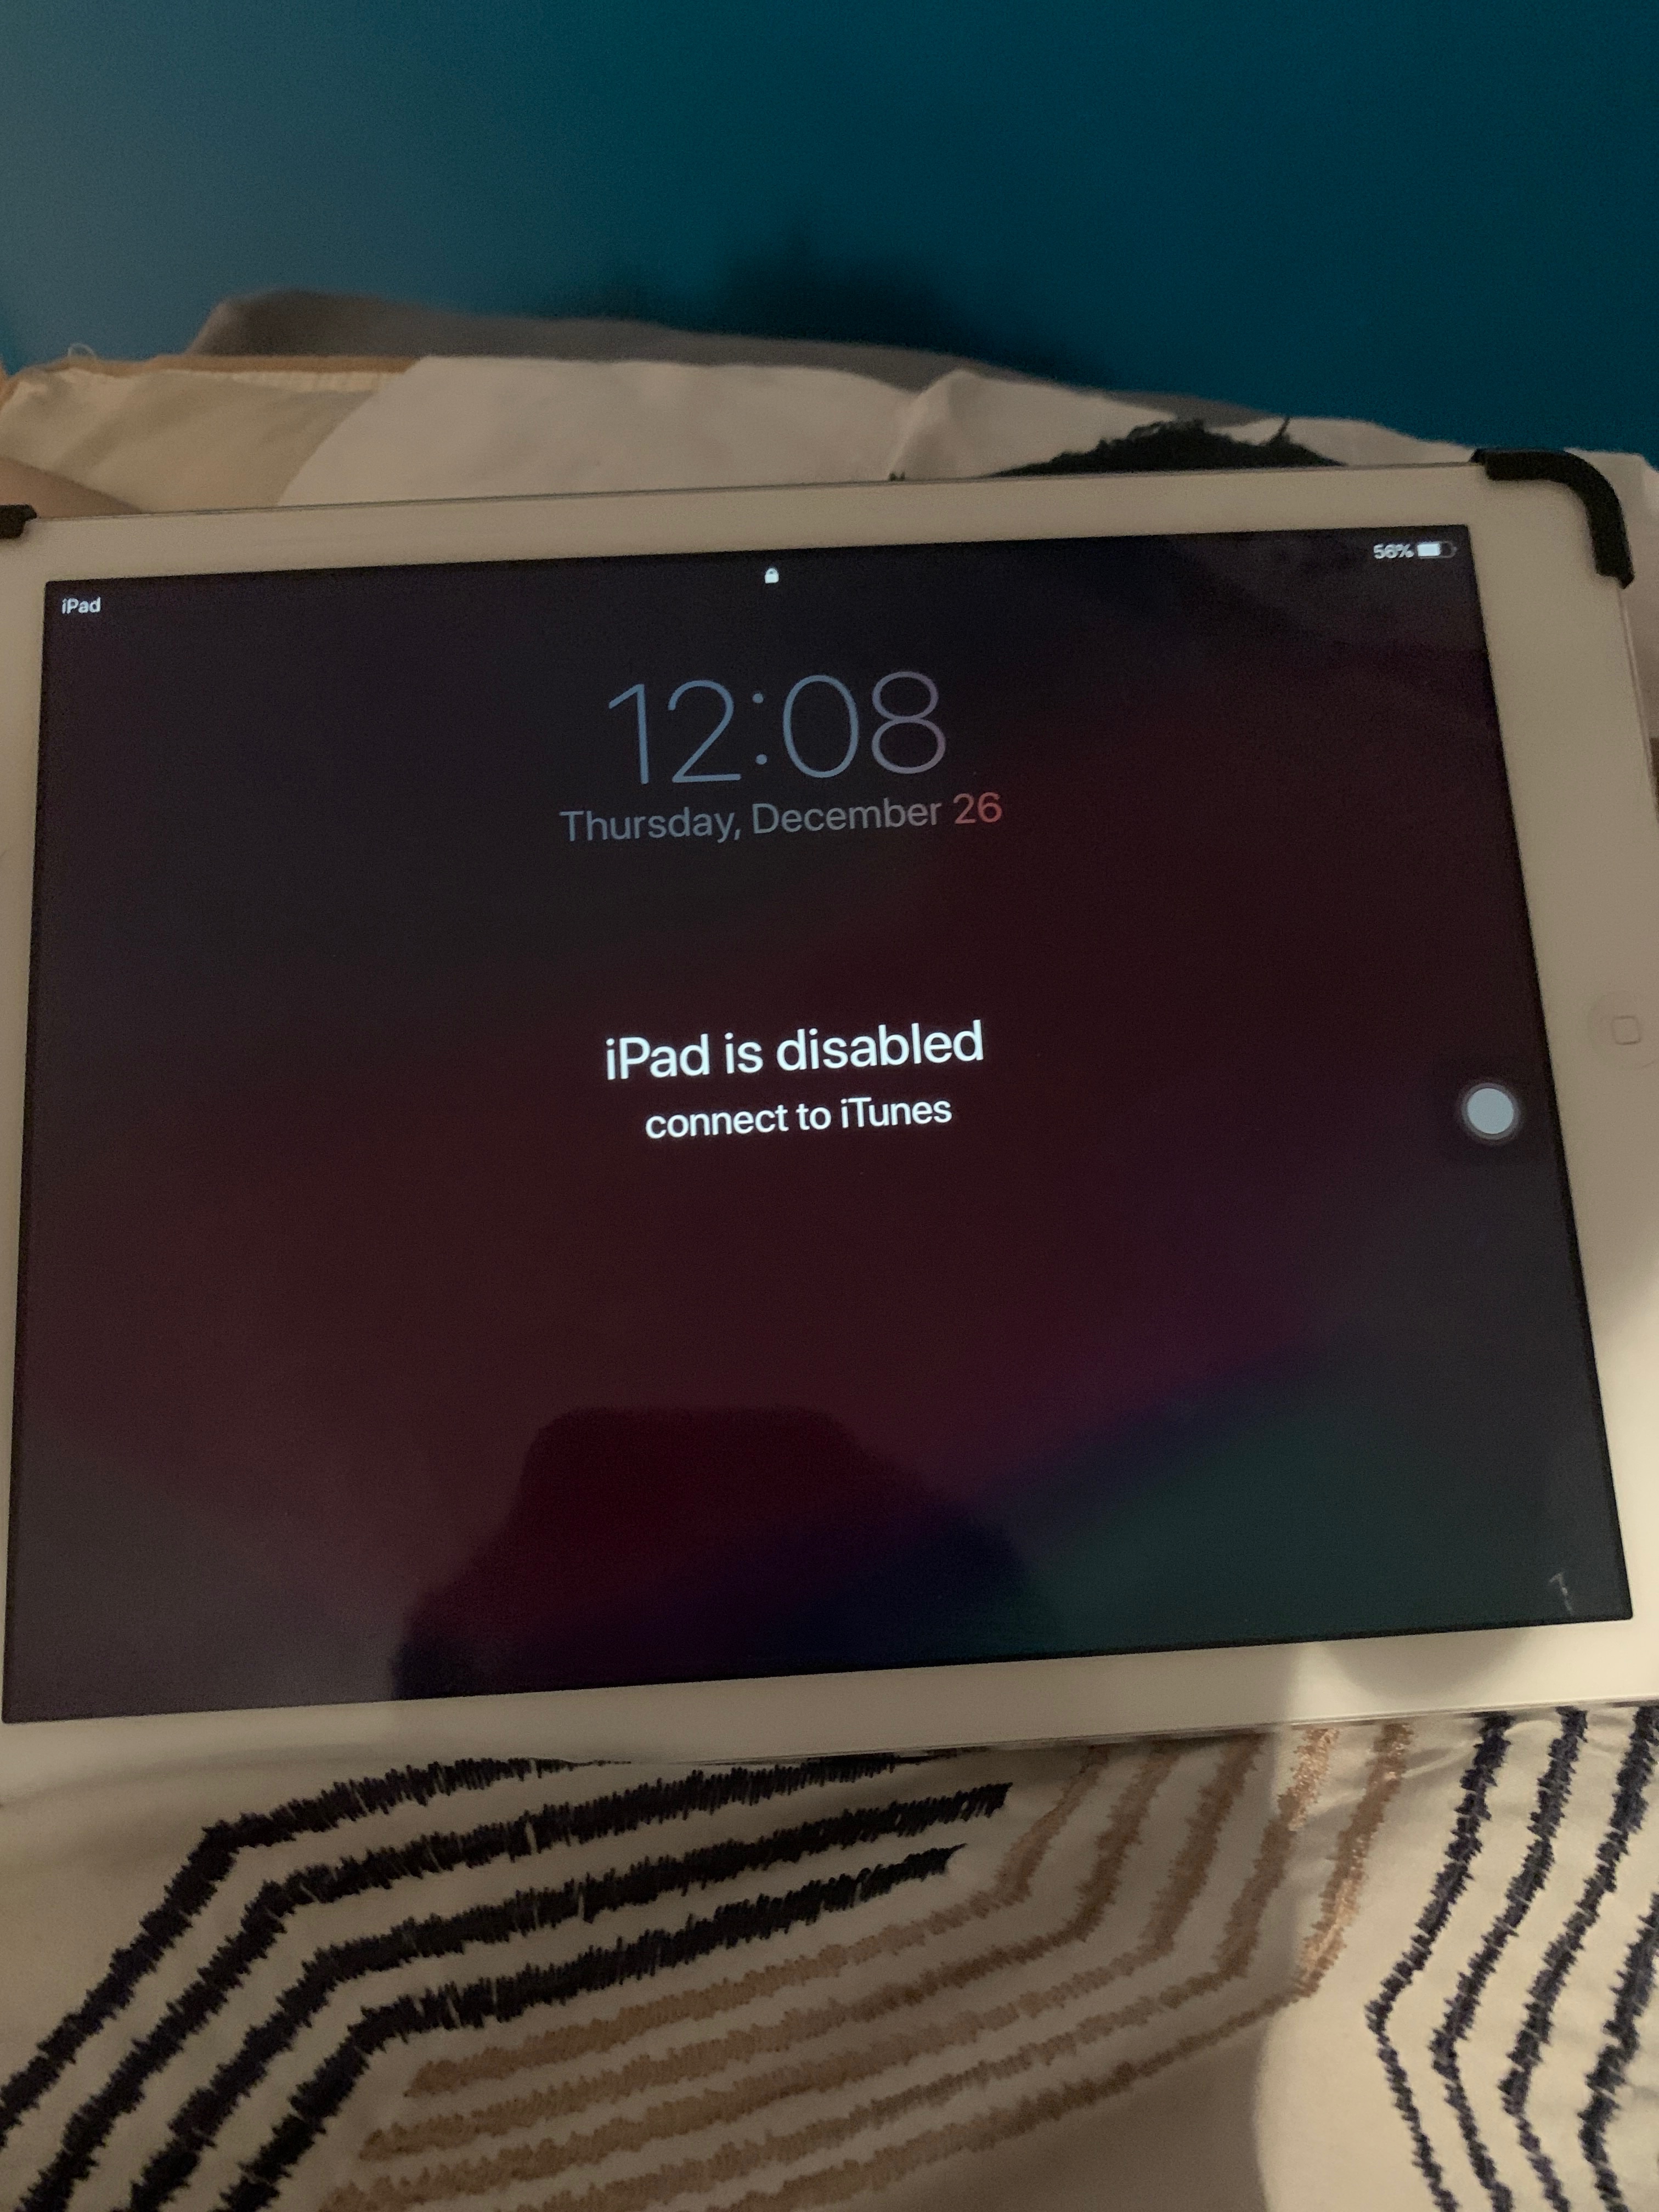 Access denied on iPhone and iPad with os … - Apple Community